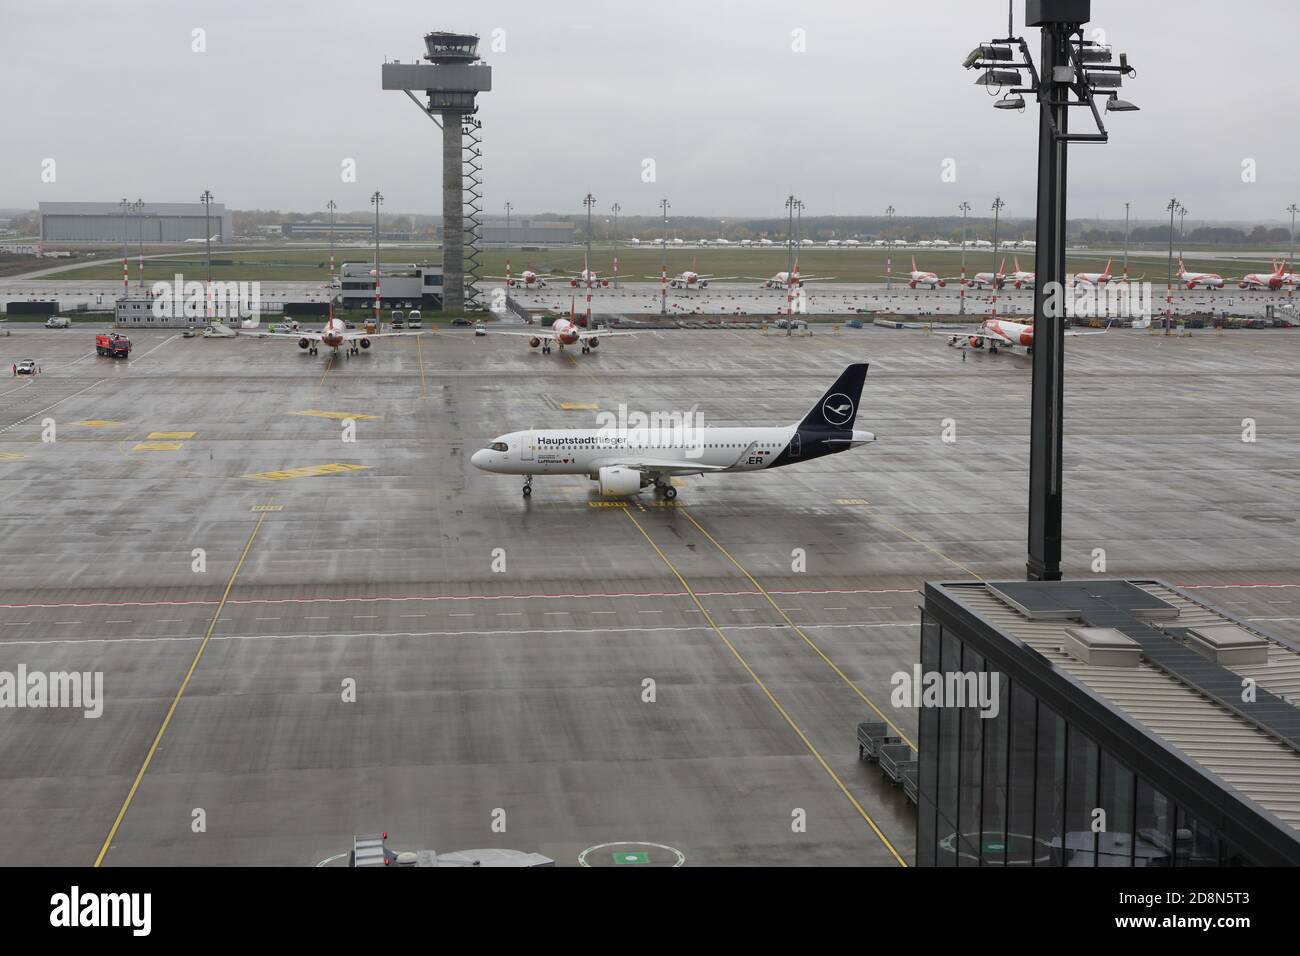 10/31/2020, Schönefeld, Germany, Arrival of the first Lufthansa flight at the new Berlin Brandenburg Willy Brandt Airport in Schönefeld.. Arrival of the first two flights from easyJet and Lufthansa to the new Berlin Brandenburg Willy Brandt Airport in Schönefeld. on  October 31th. Stock Photo